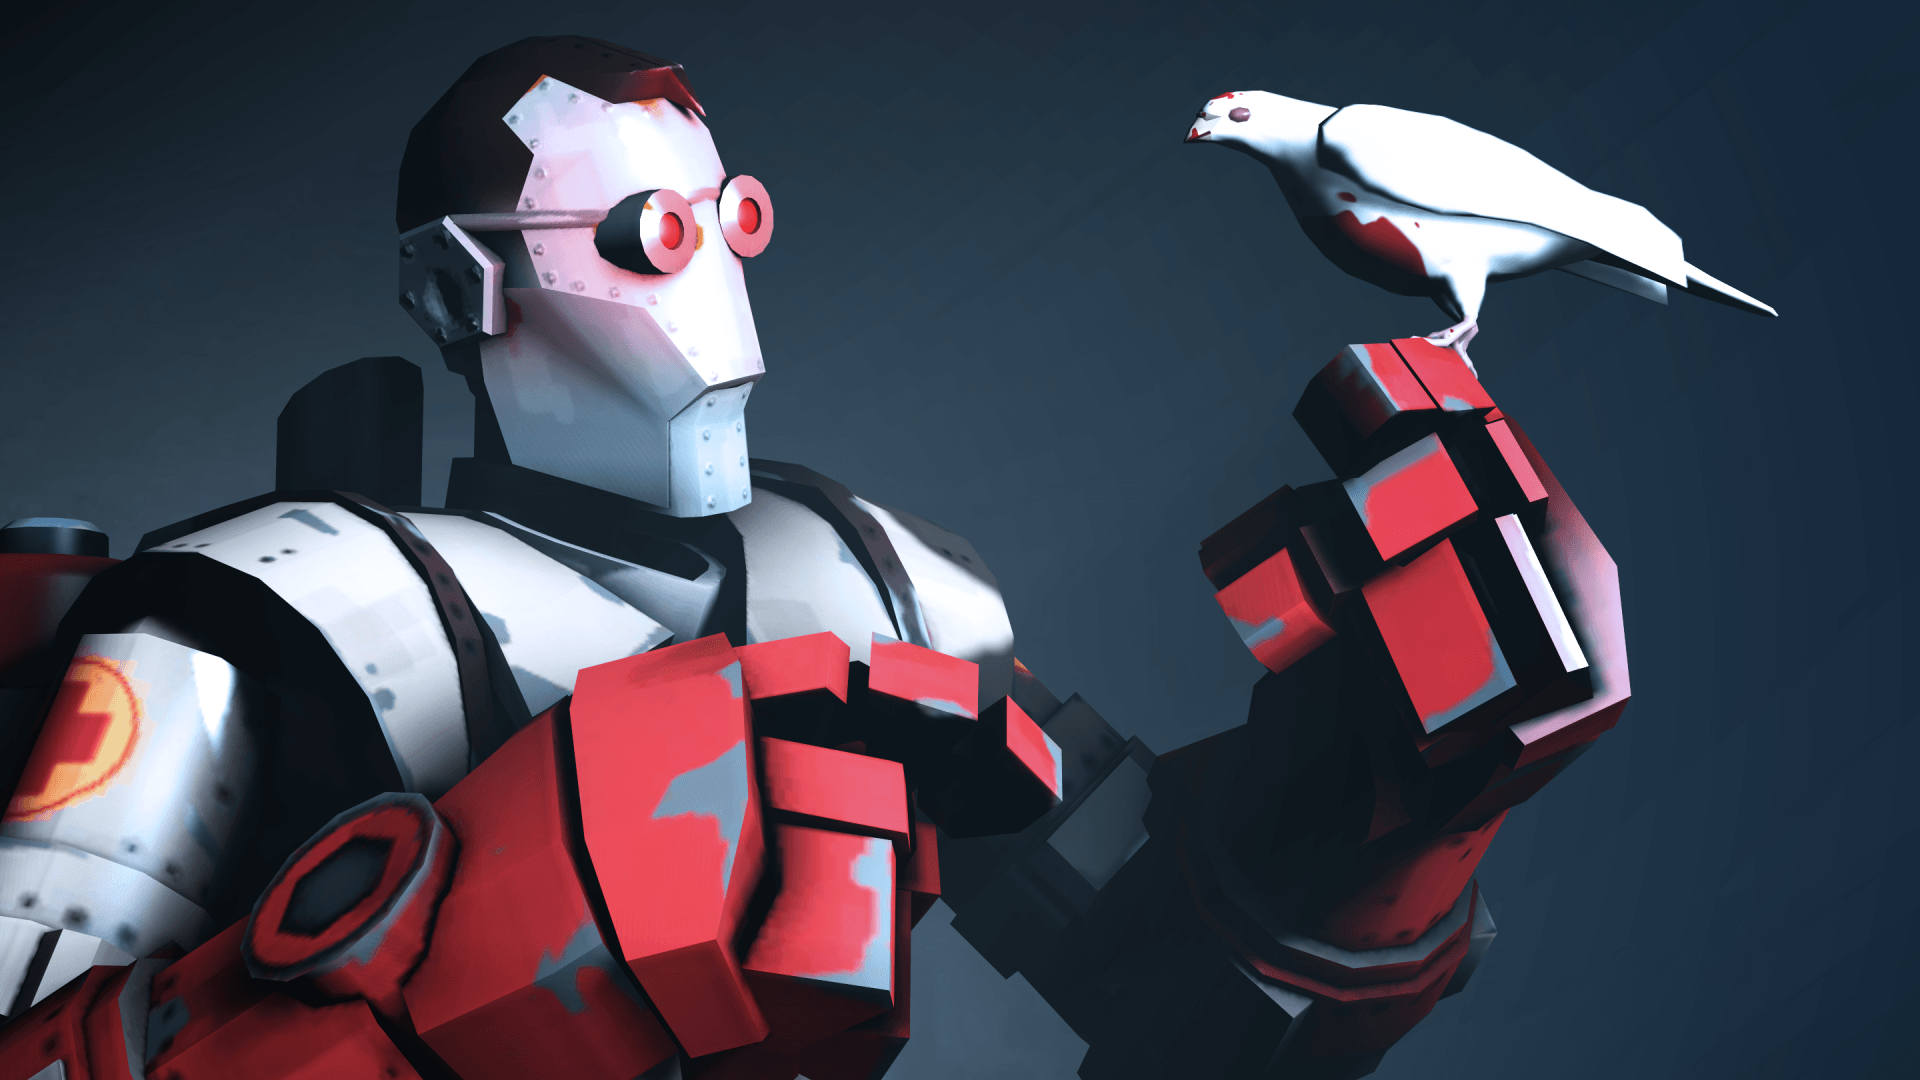 Simply: Medic TF2 Team Fortress 2 doves robots